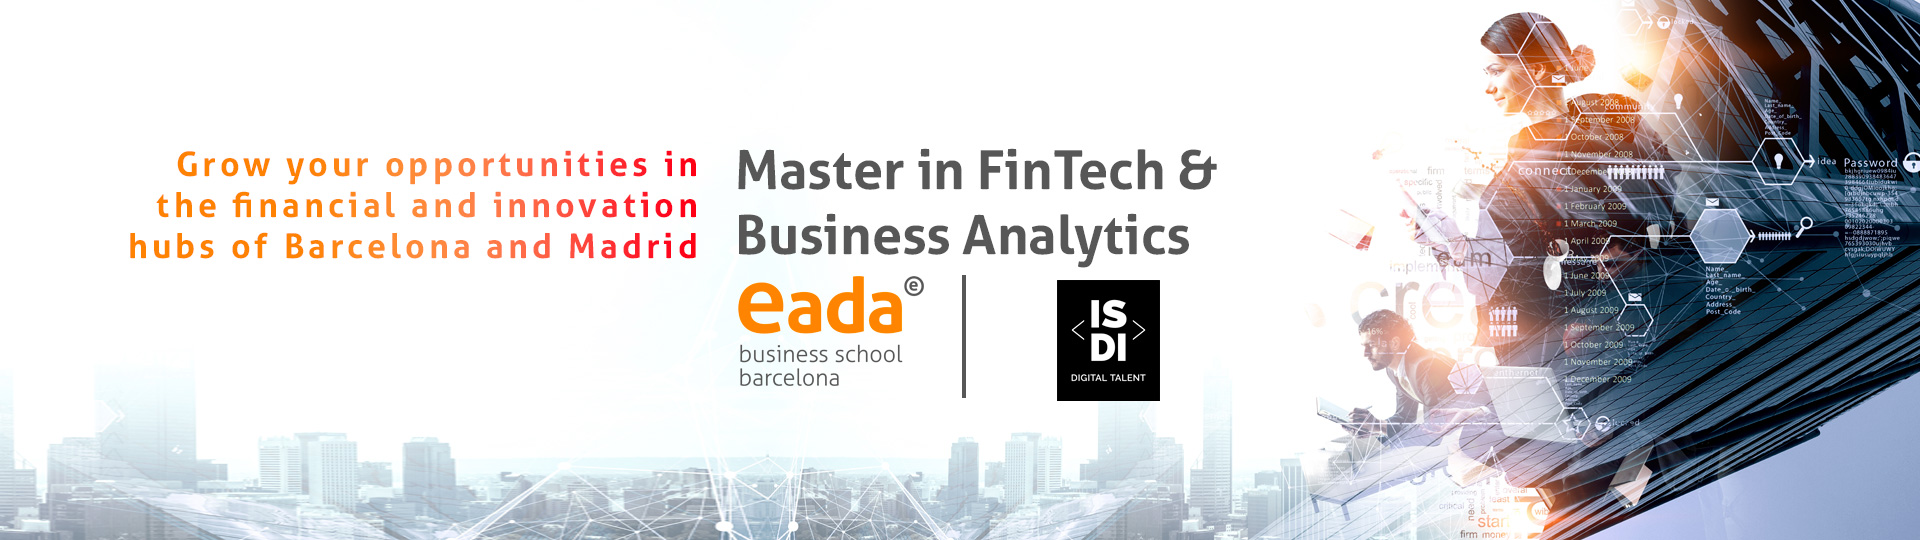 Master in FinTech & Business Analytics: Grow your opportunities in the financial and innovation hubs of Barcelona and Madrid